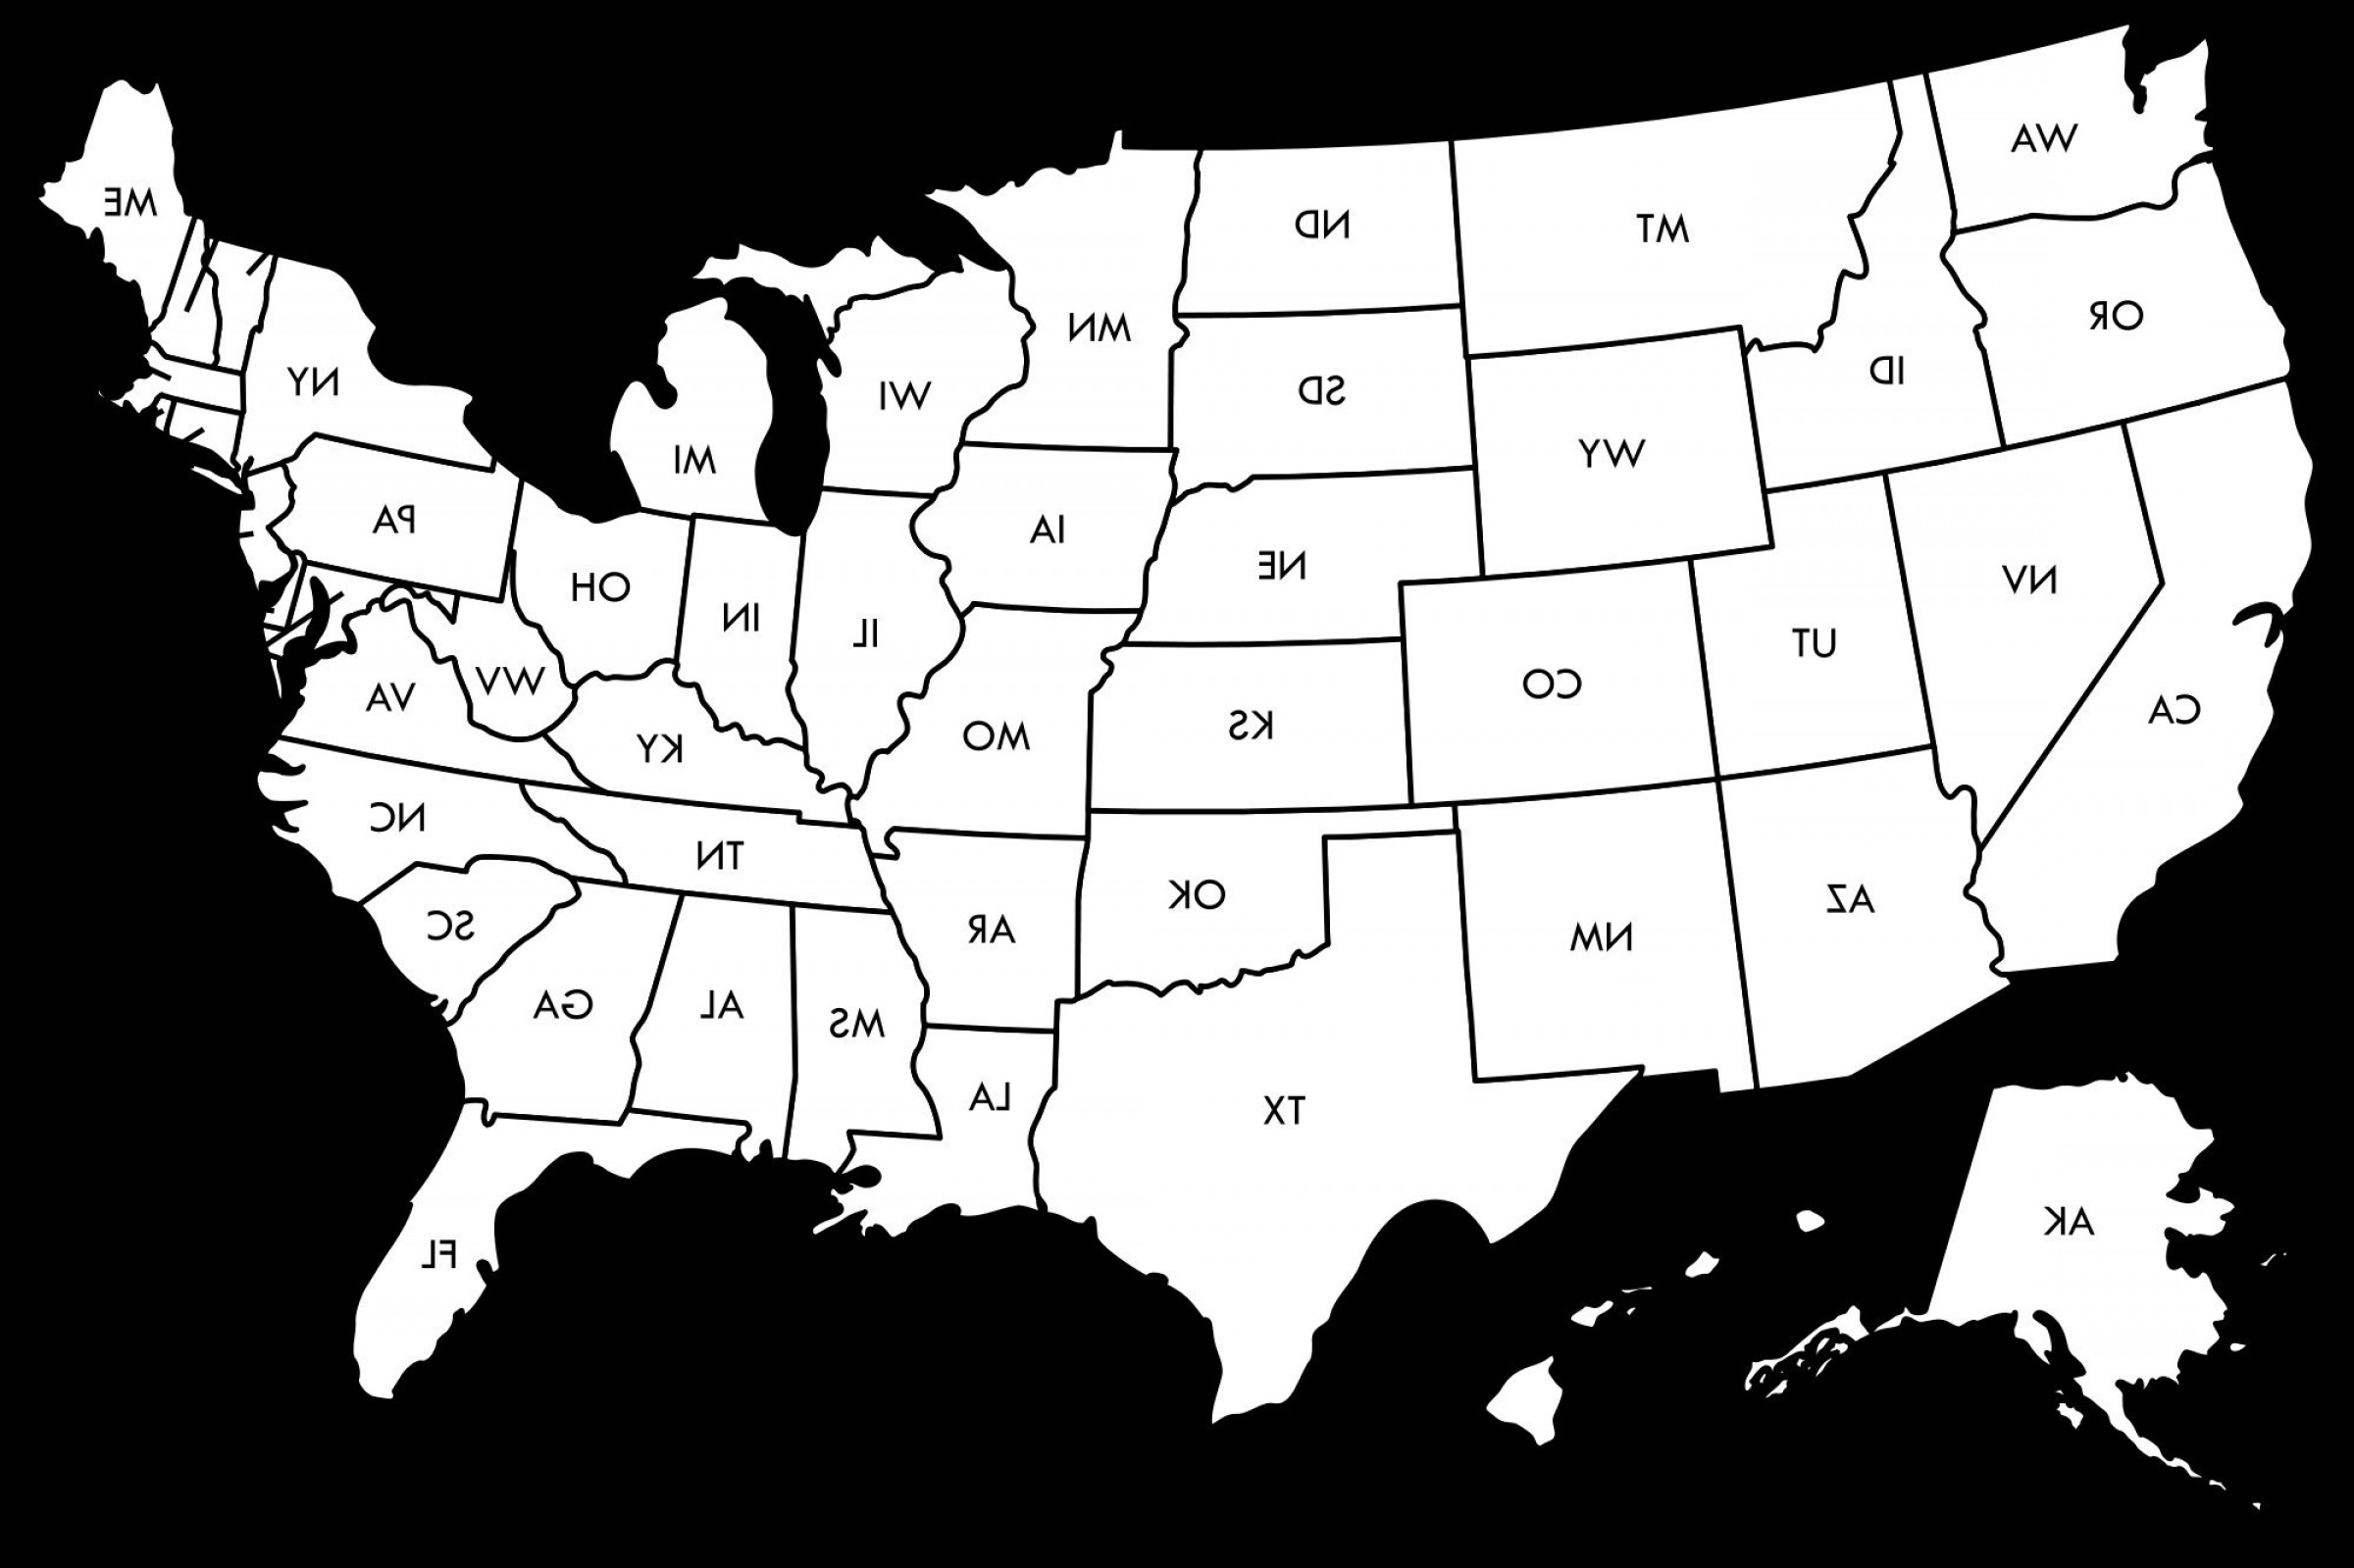 States of america. The United States of America карта. USA States Map. USA State карта. USA 50 States.